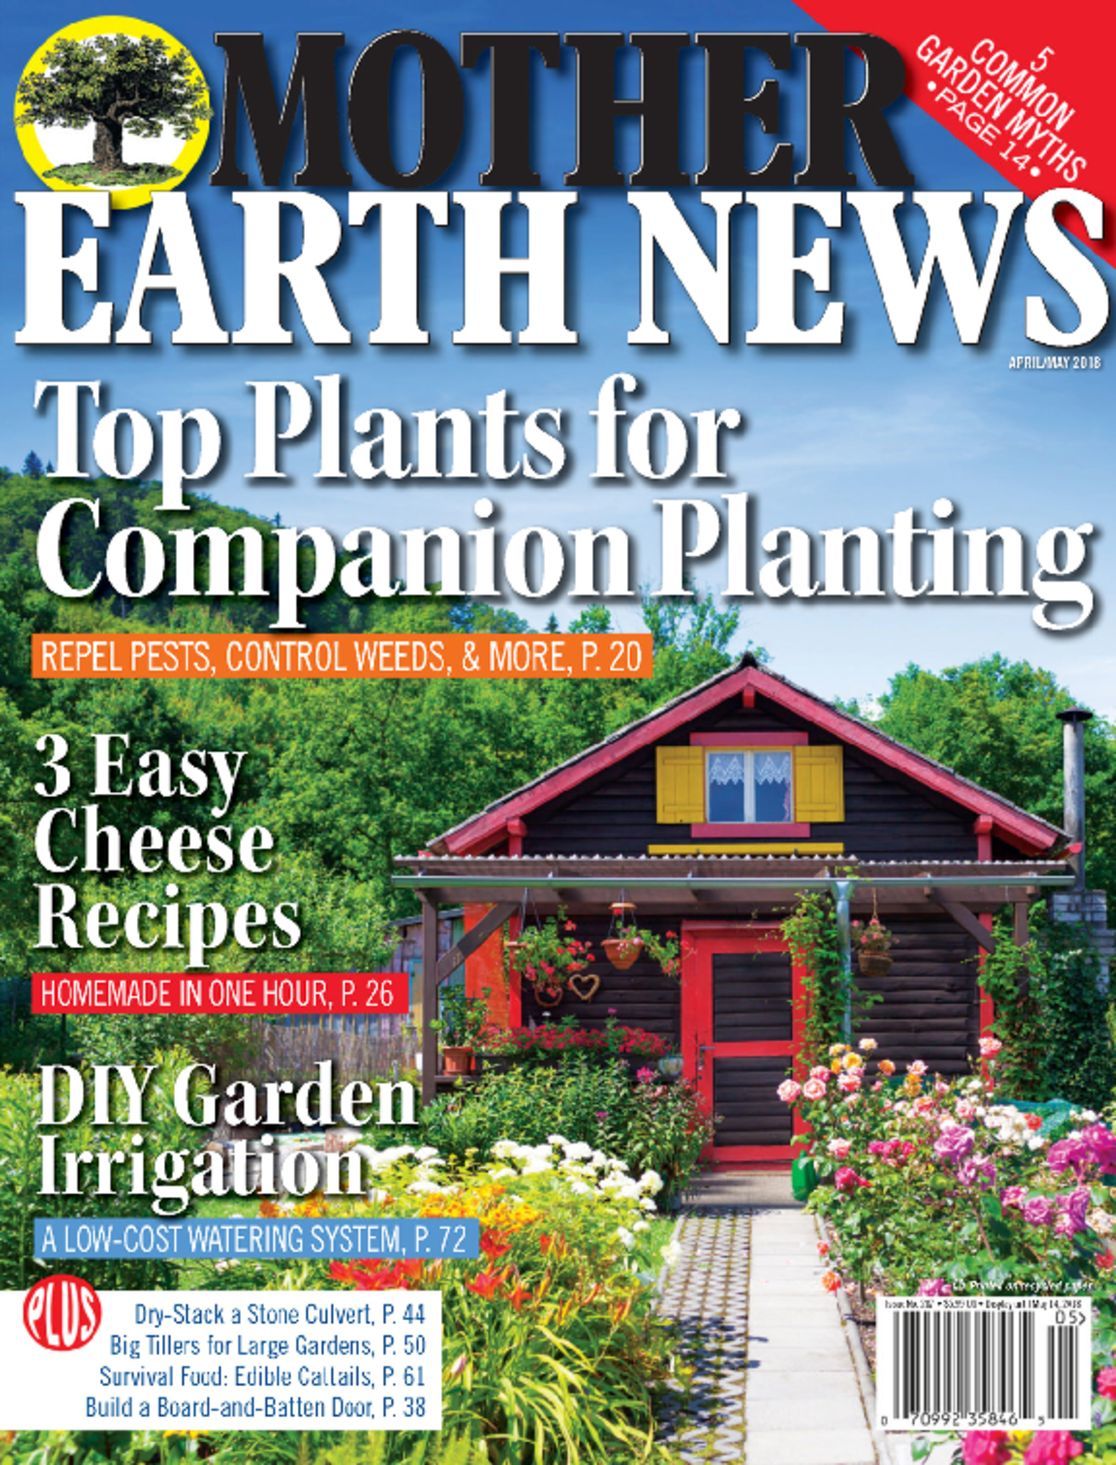 coupon for garden planner subscription and mother earth news